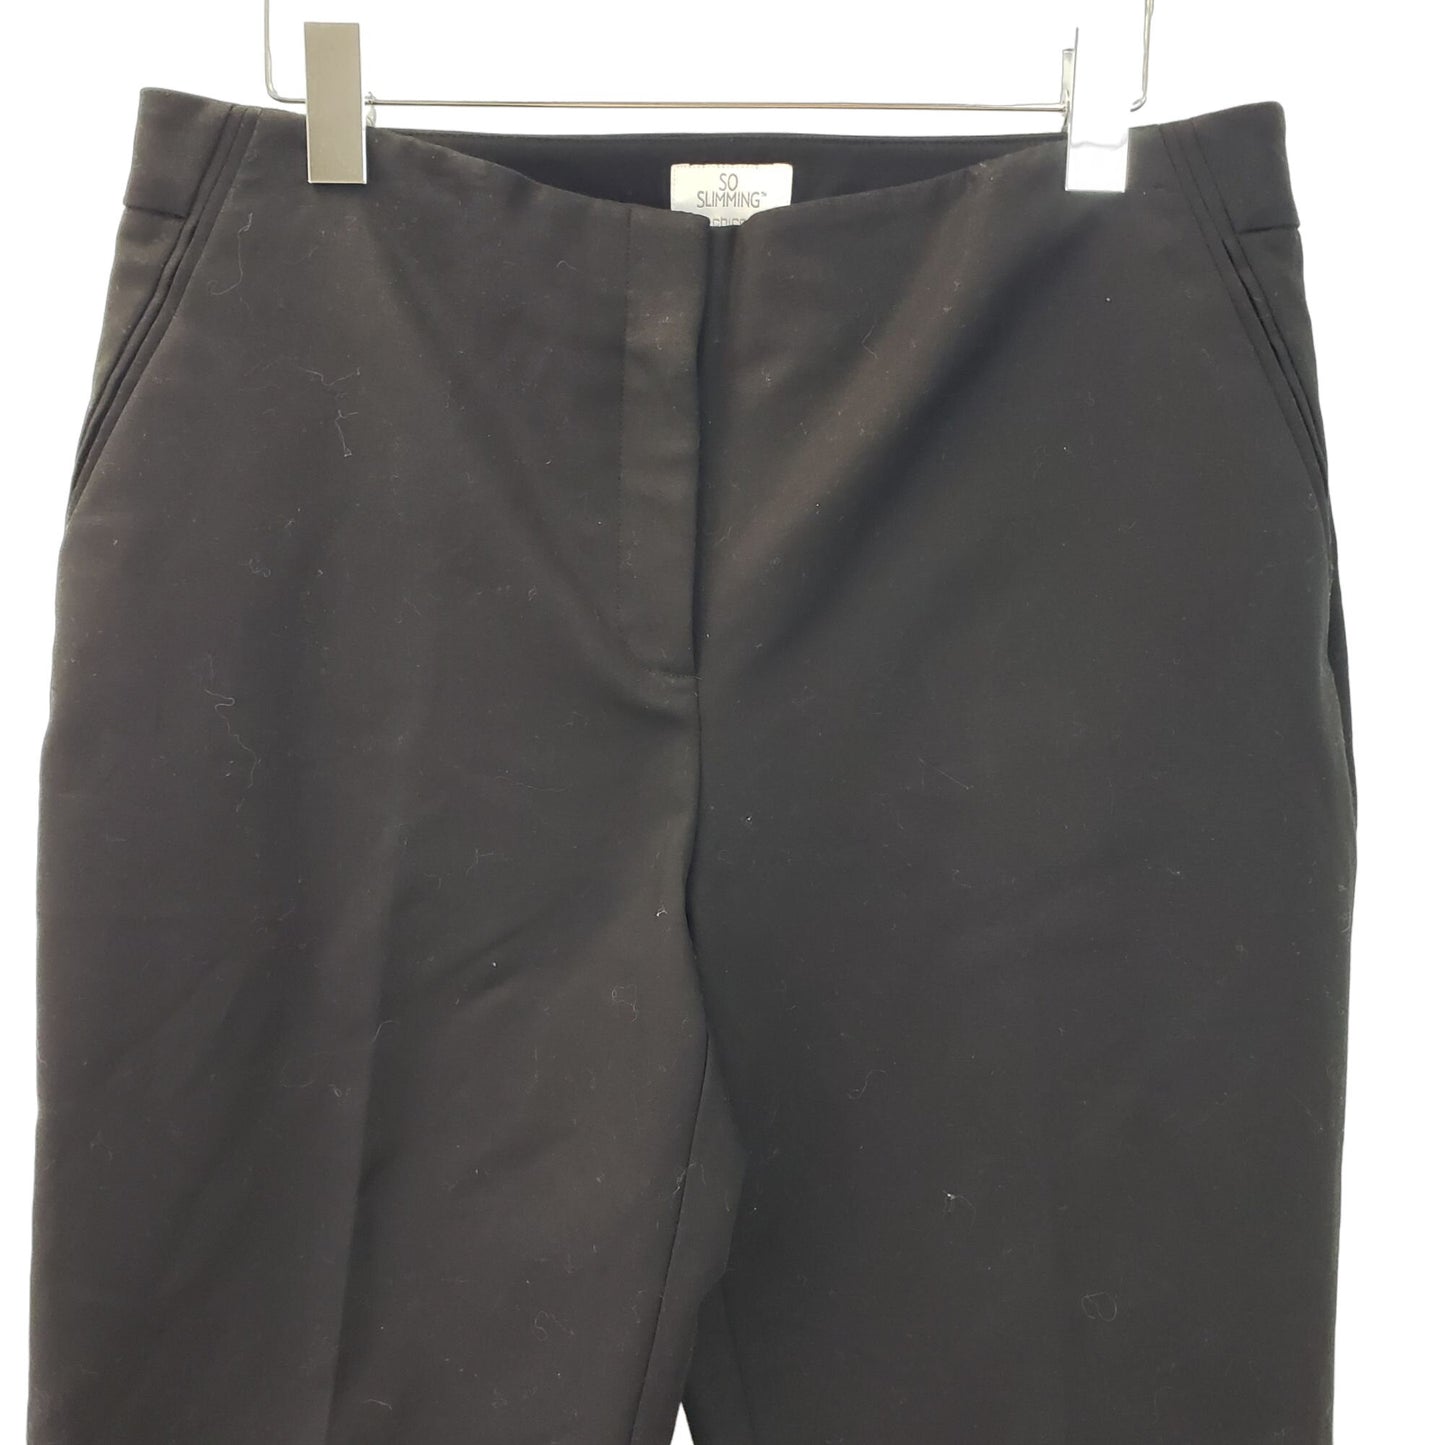 Chico's So Slimming Cuffed Hem Ankle Pants Size Chico's 1/Medium